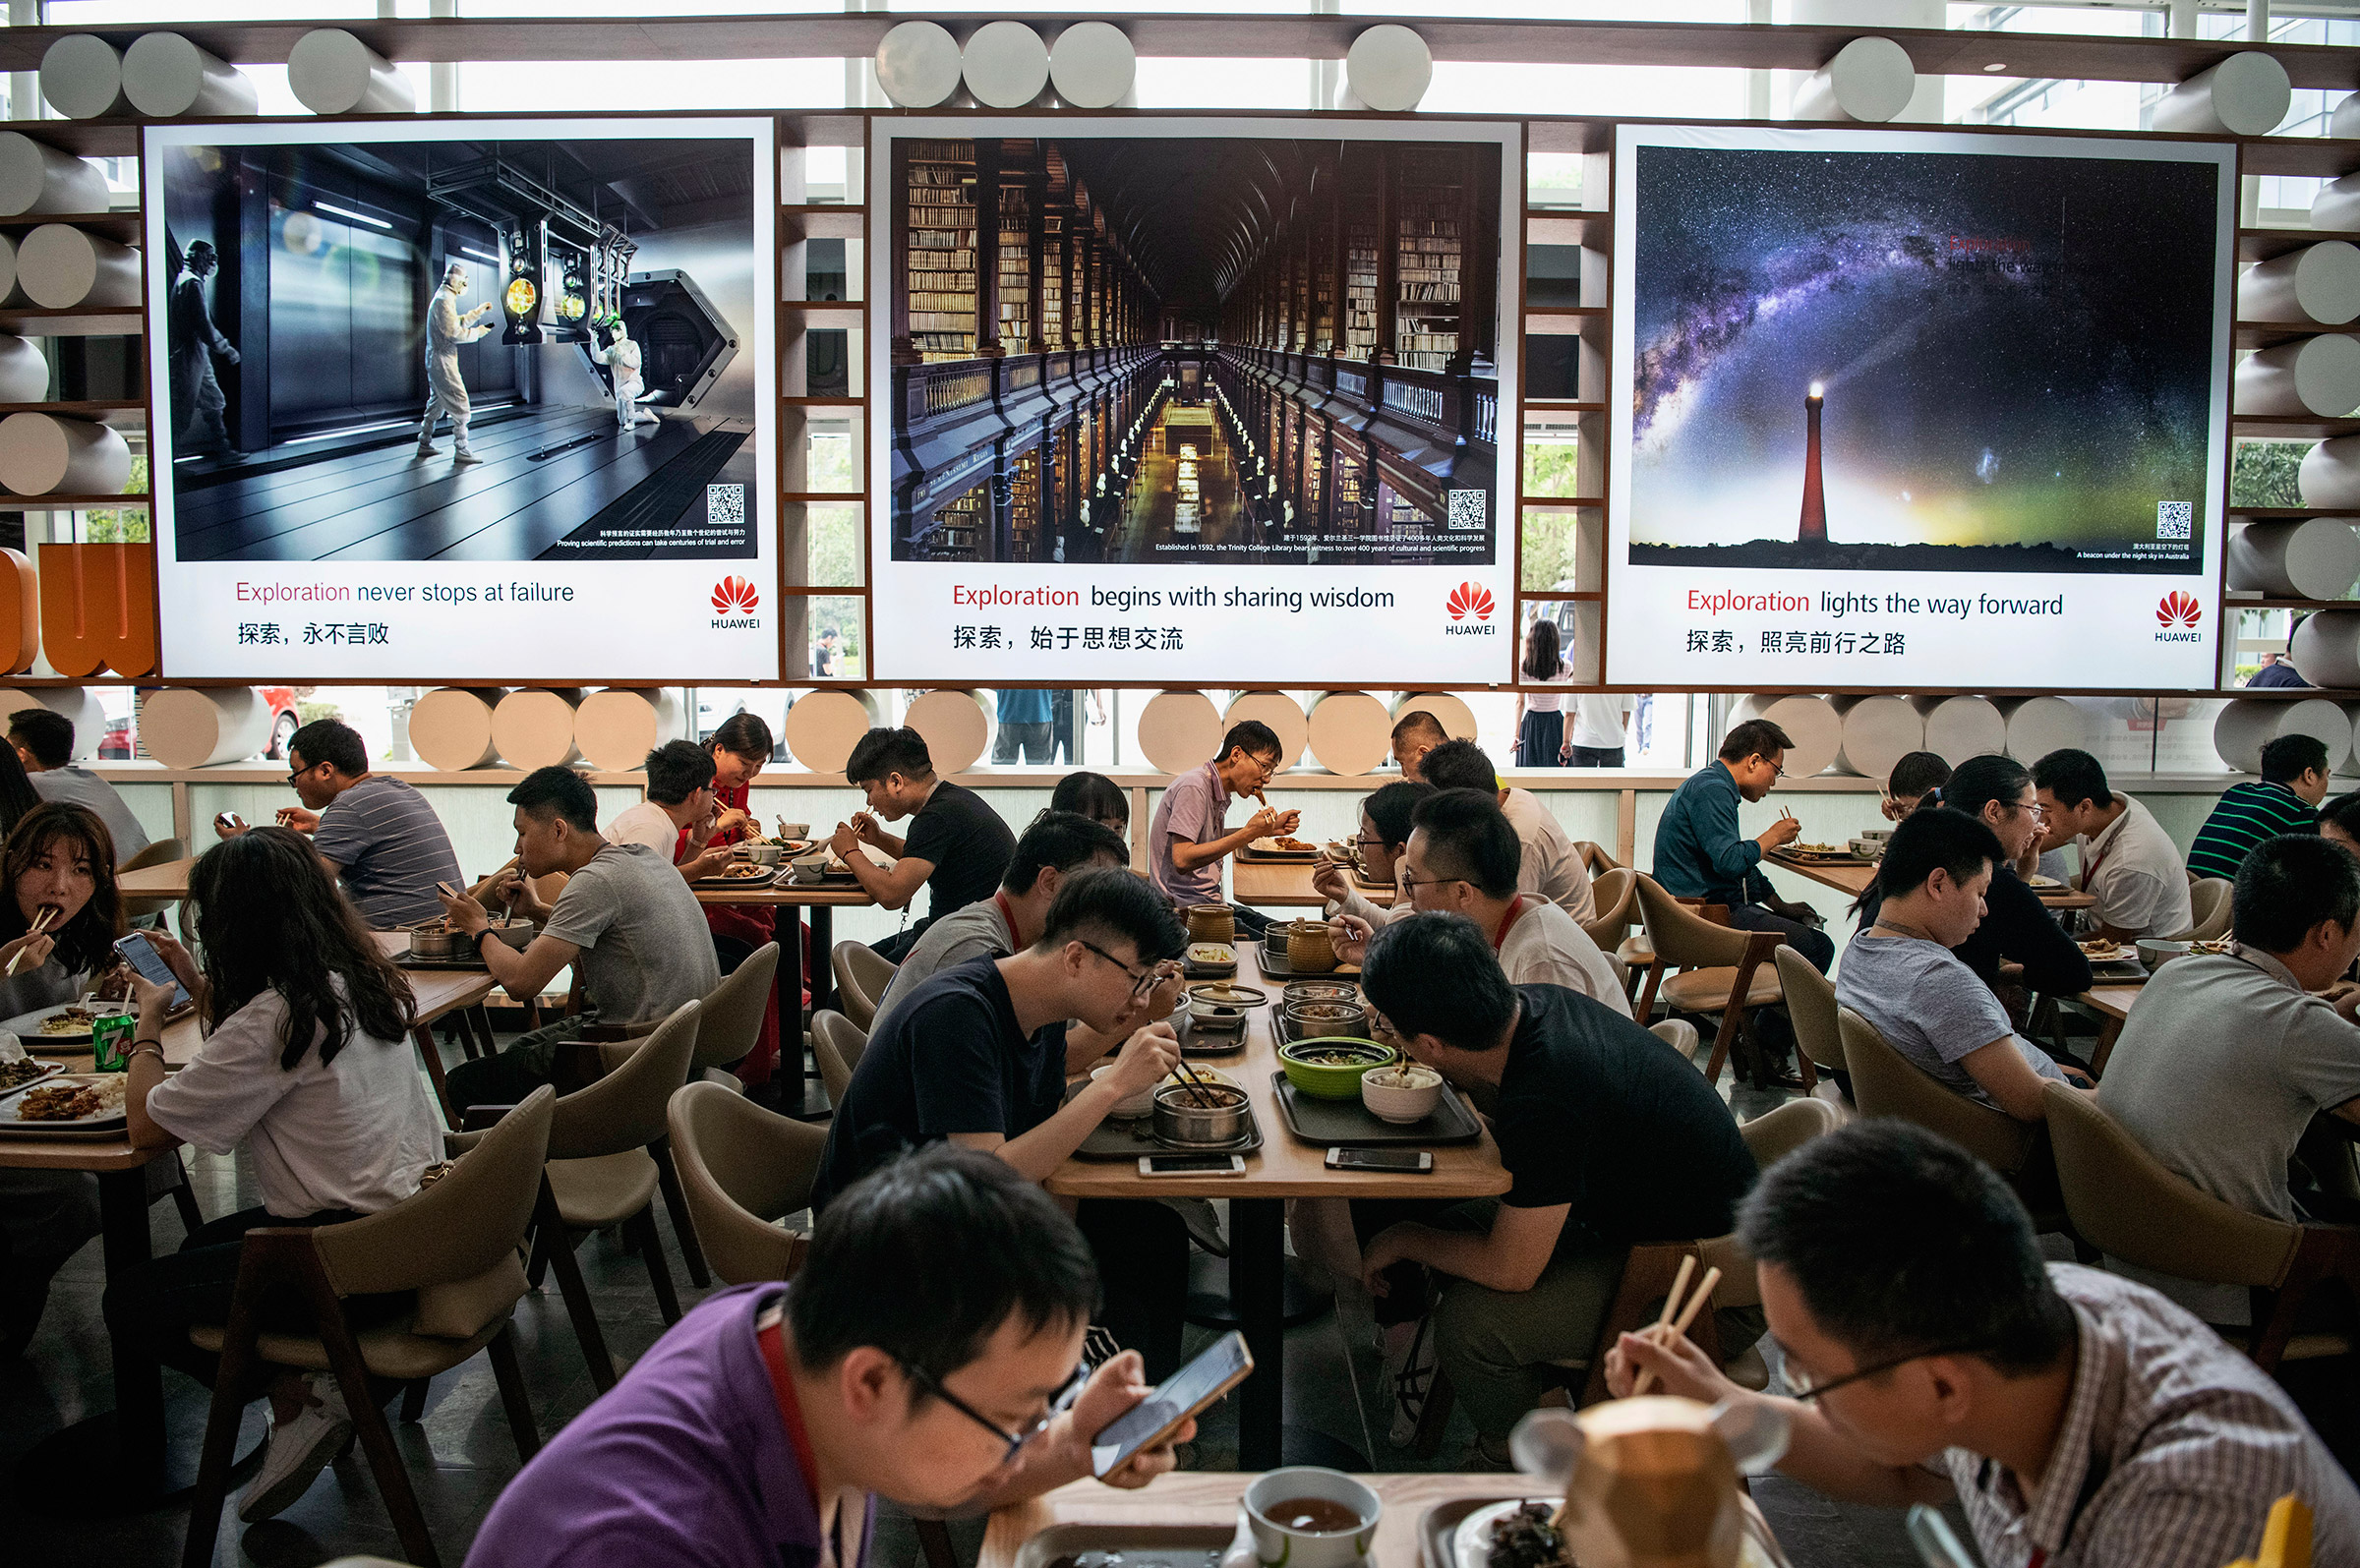 Workers eating lunch at the Huawei campus in Shenzhen, China